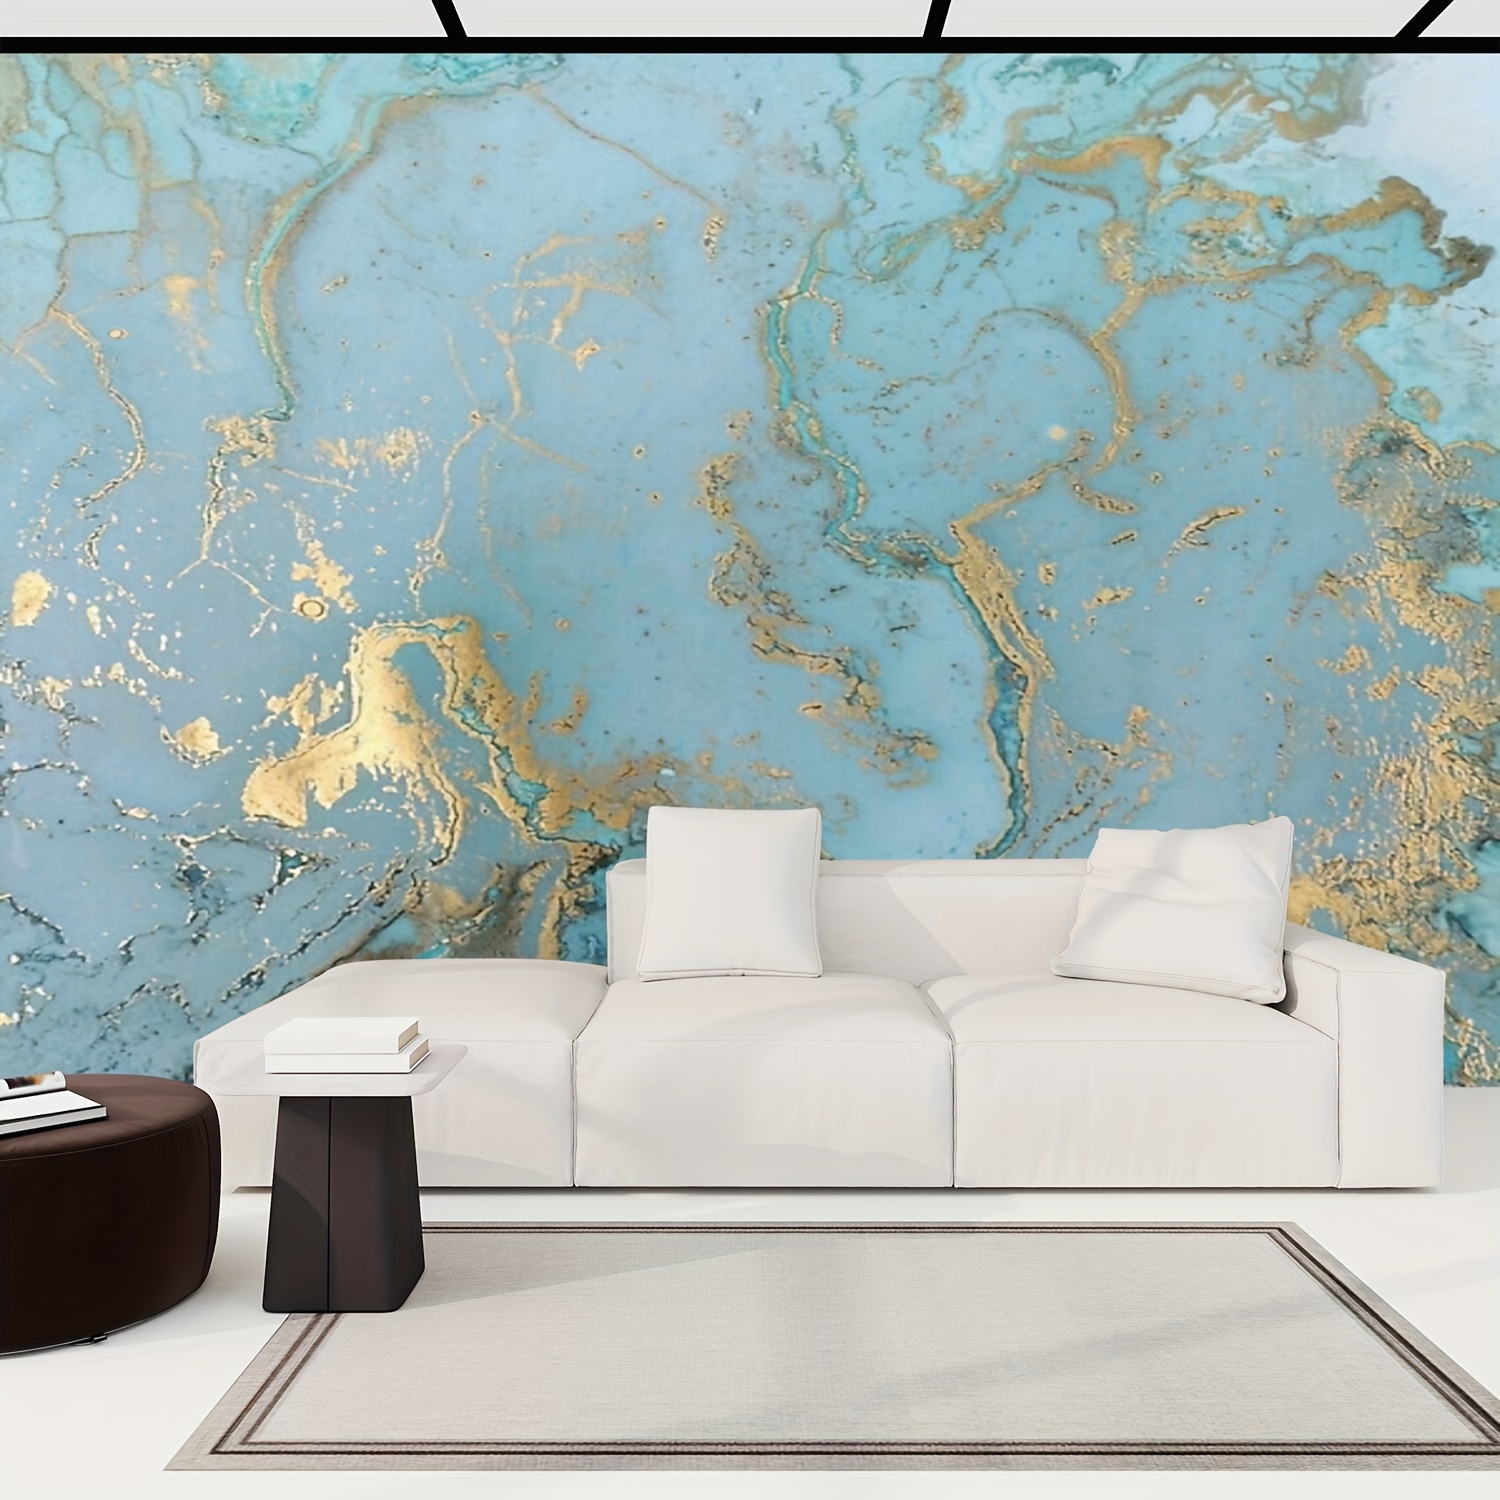 

Canvas Wallpaper Marble Gold Turquoise Blue Teal Marbling Peel & Stick Wallpaper Self-adhesive Removable Wall Mural Poster Sticker Background Wall Decor For Living Room Bedroom